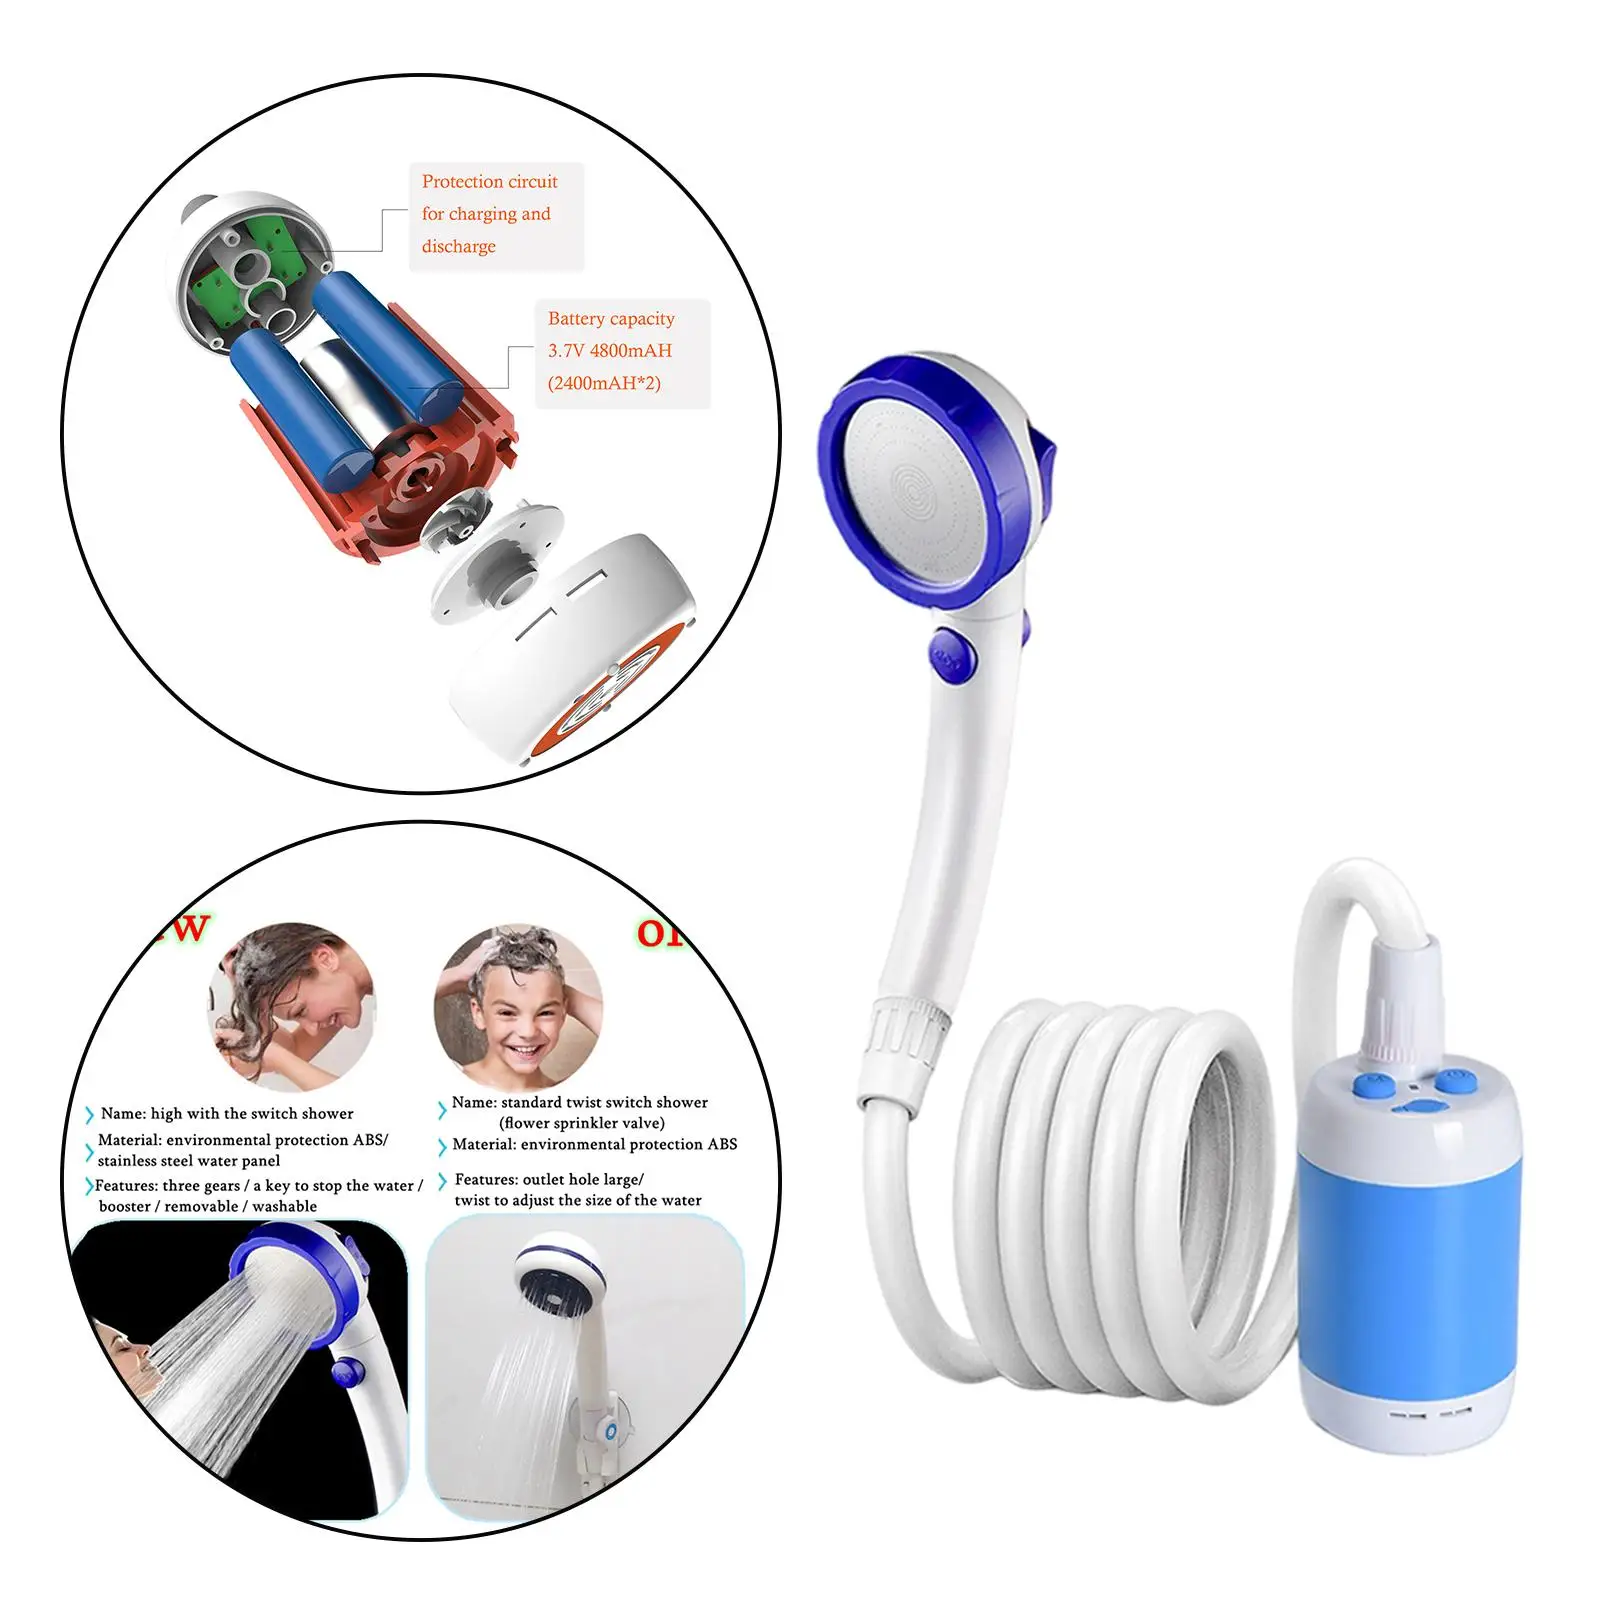 Portable Personal Electric Shower  Shower for Camping Hiking